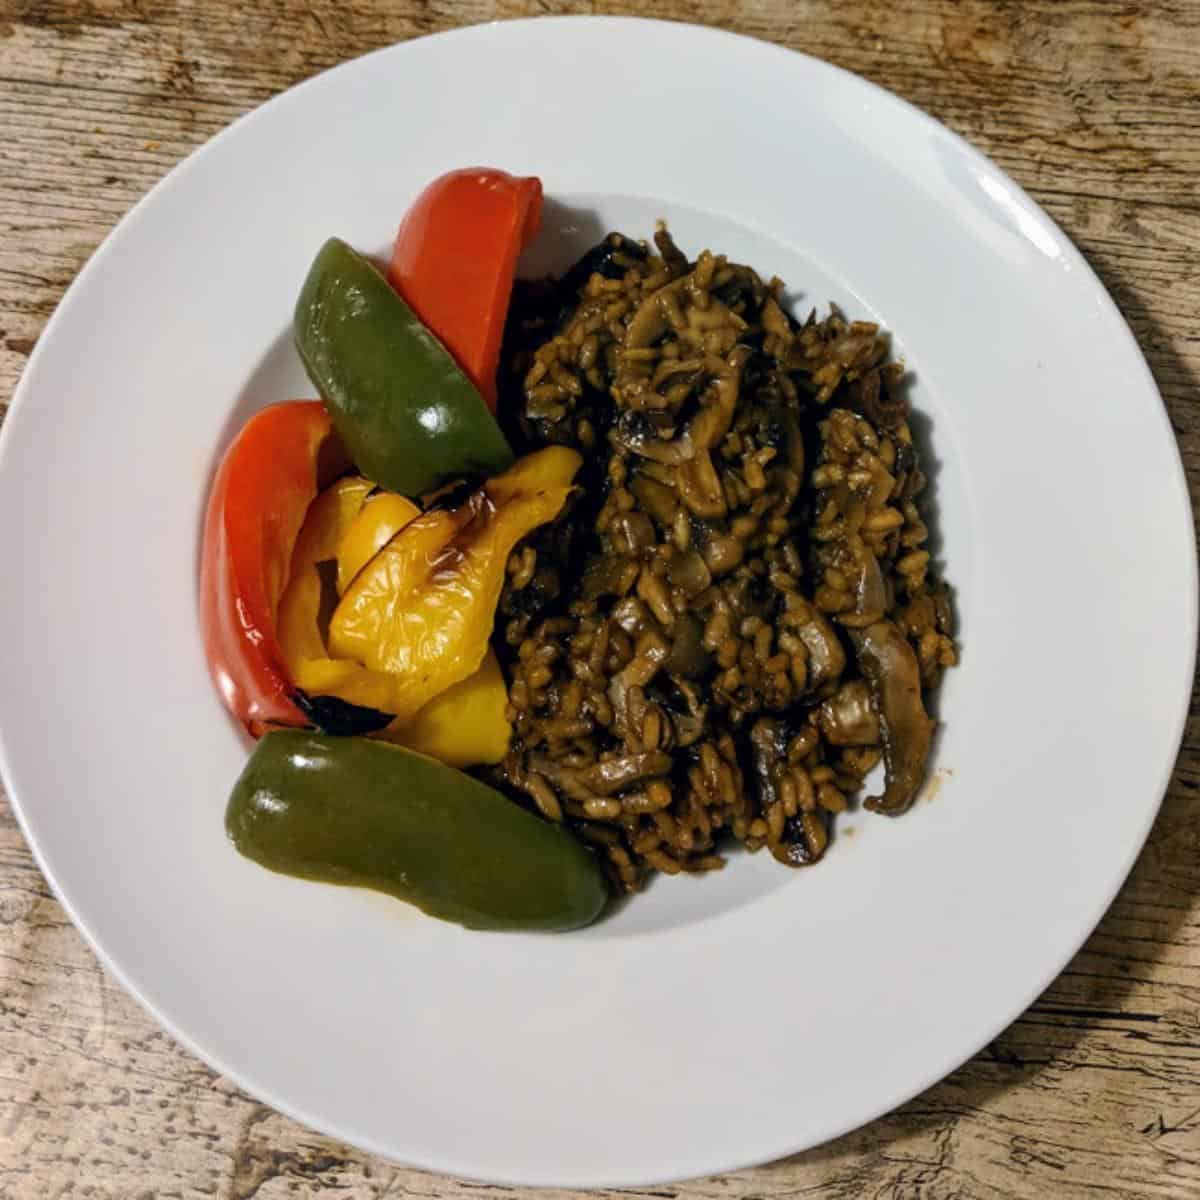 Mixed mushroom risotto with roasted peppers